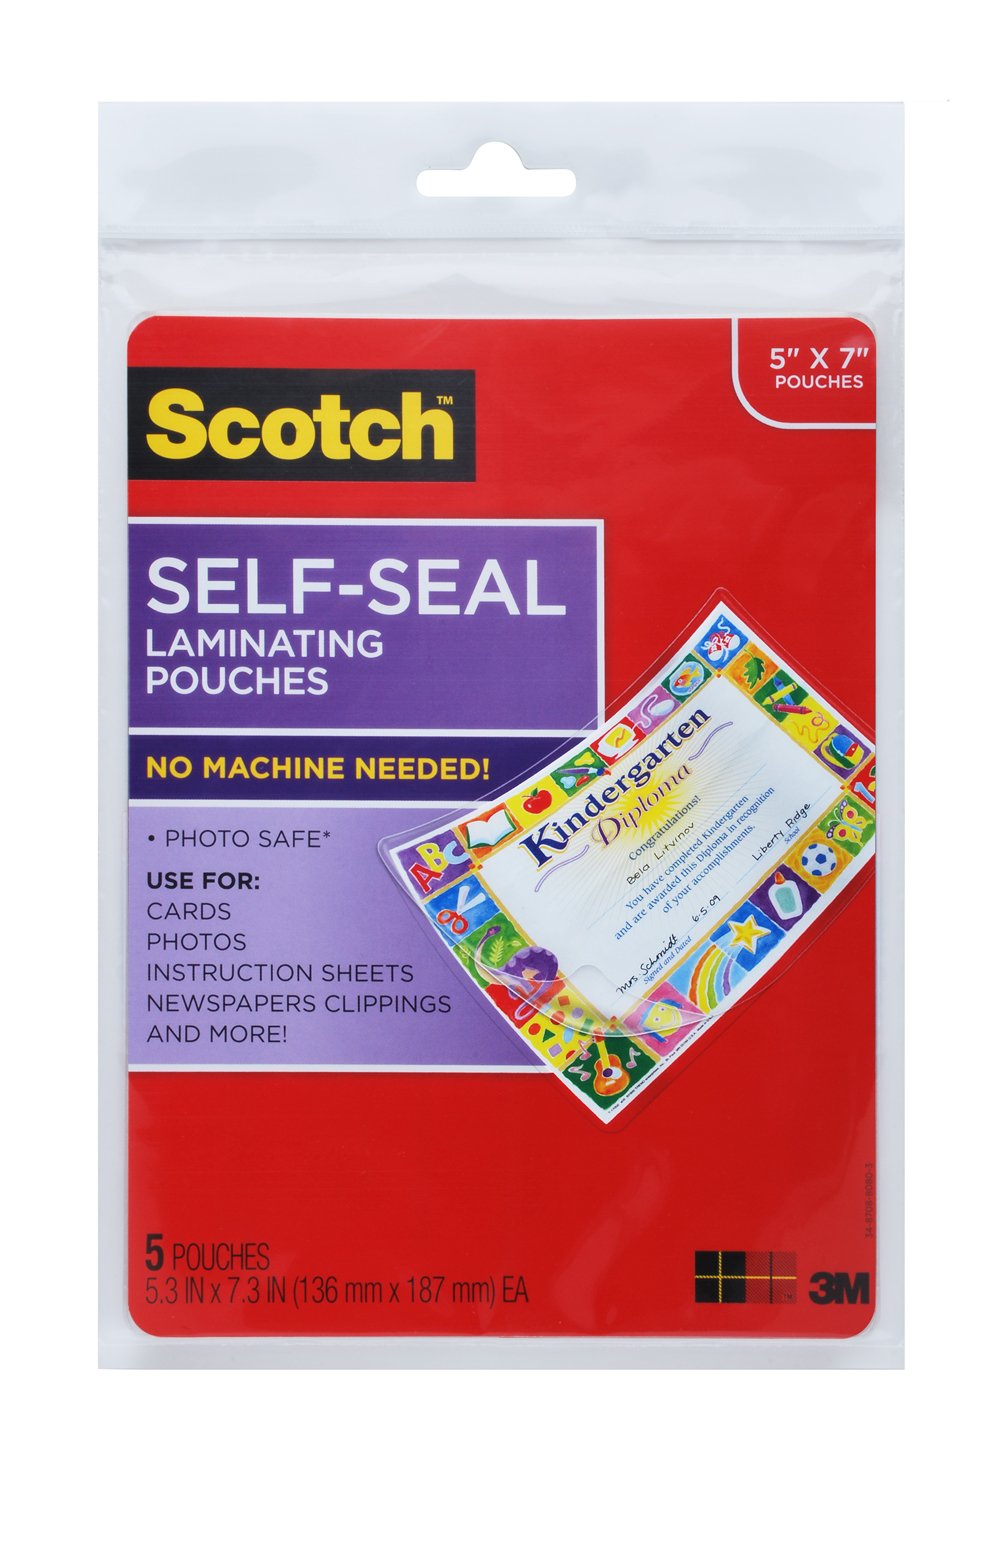 Scotch Self-Sealing Laminating Pouches and Scotch Glossy Document Laminating Pouches Bundle